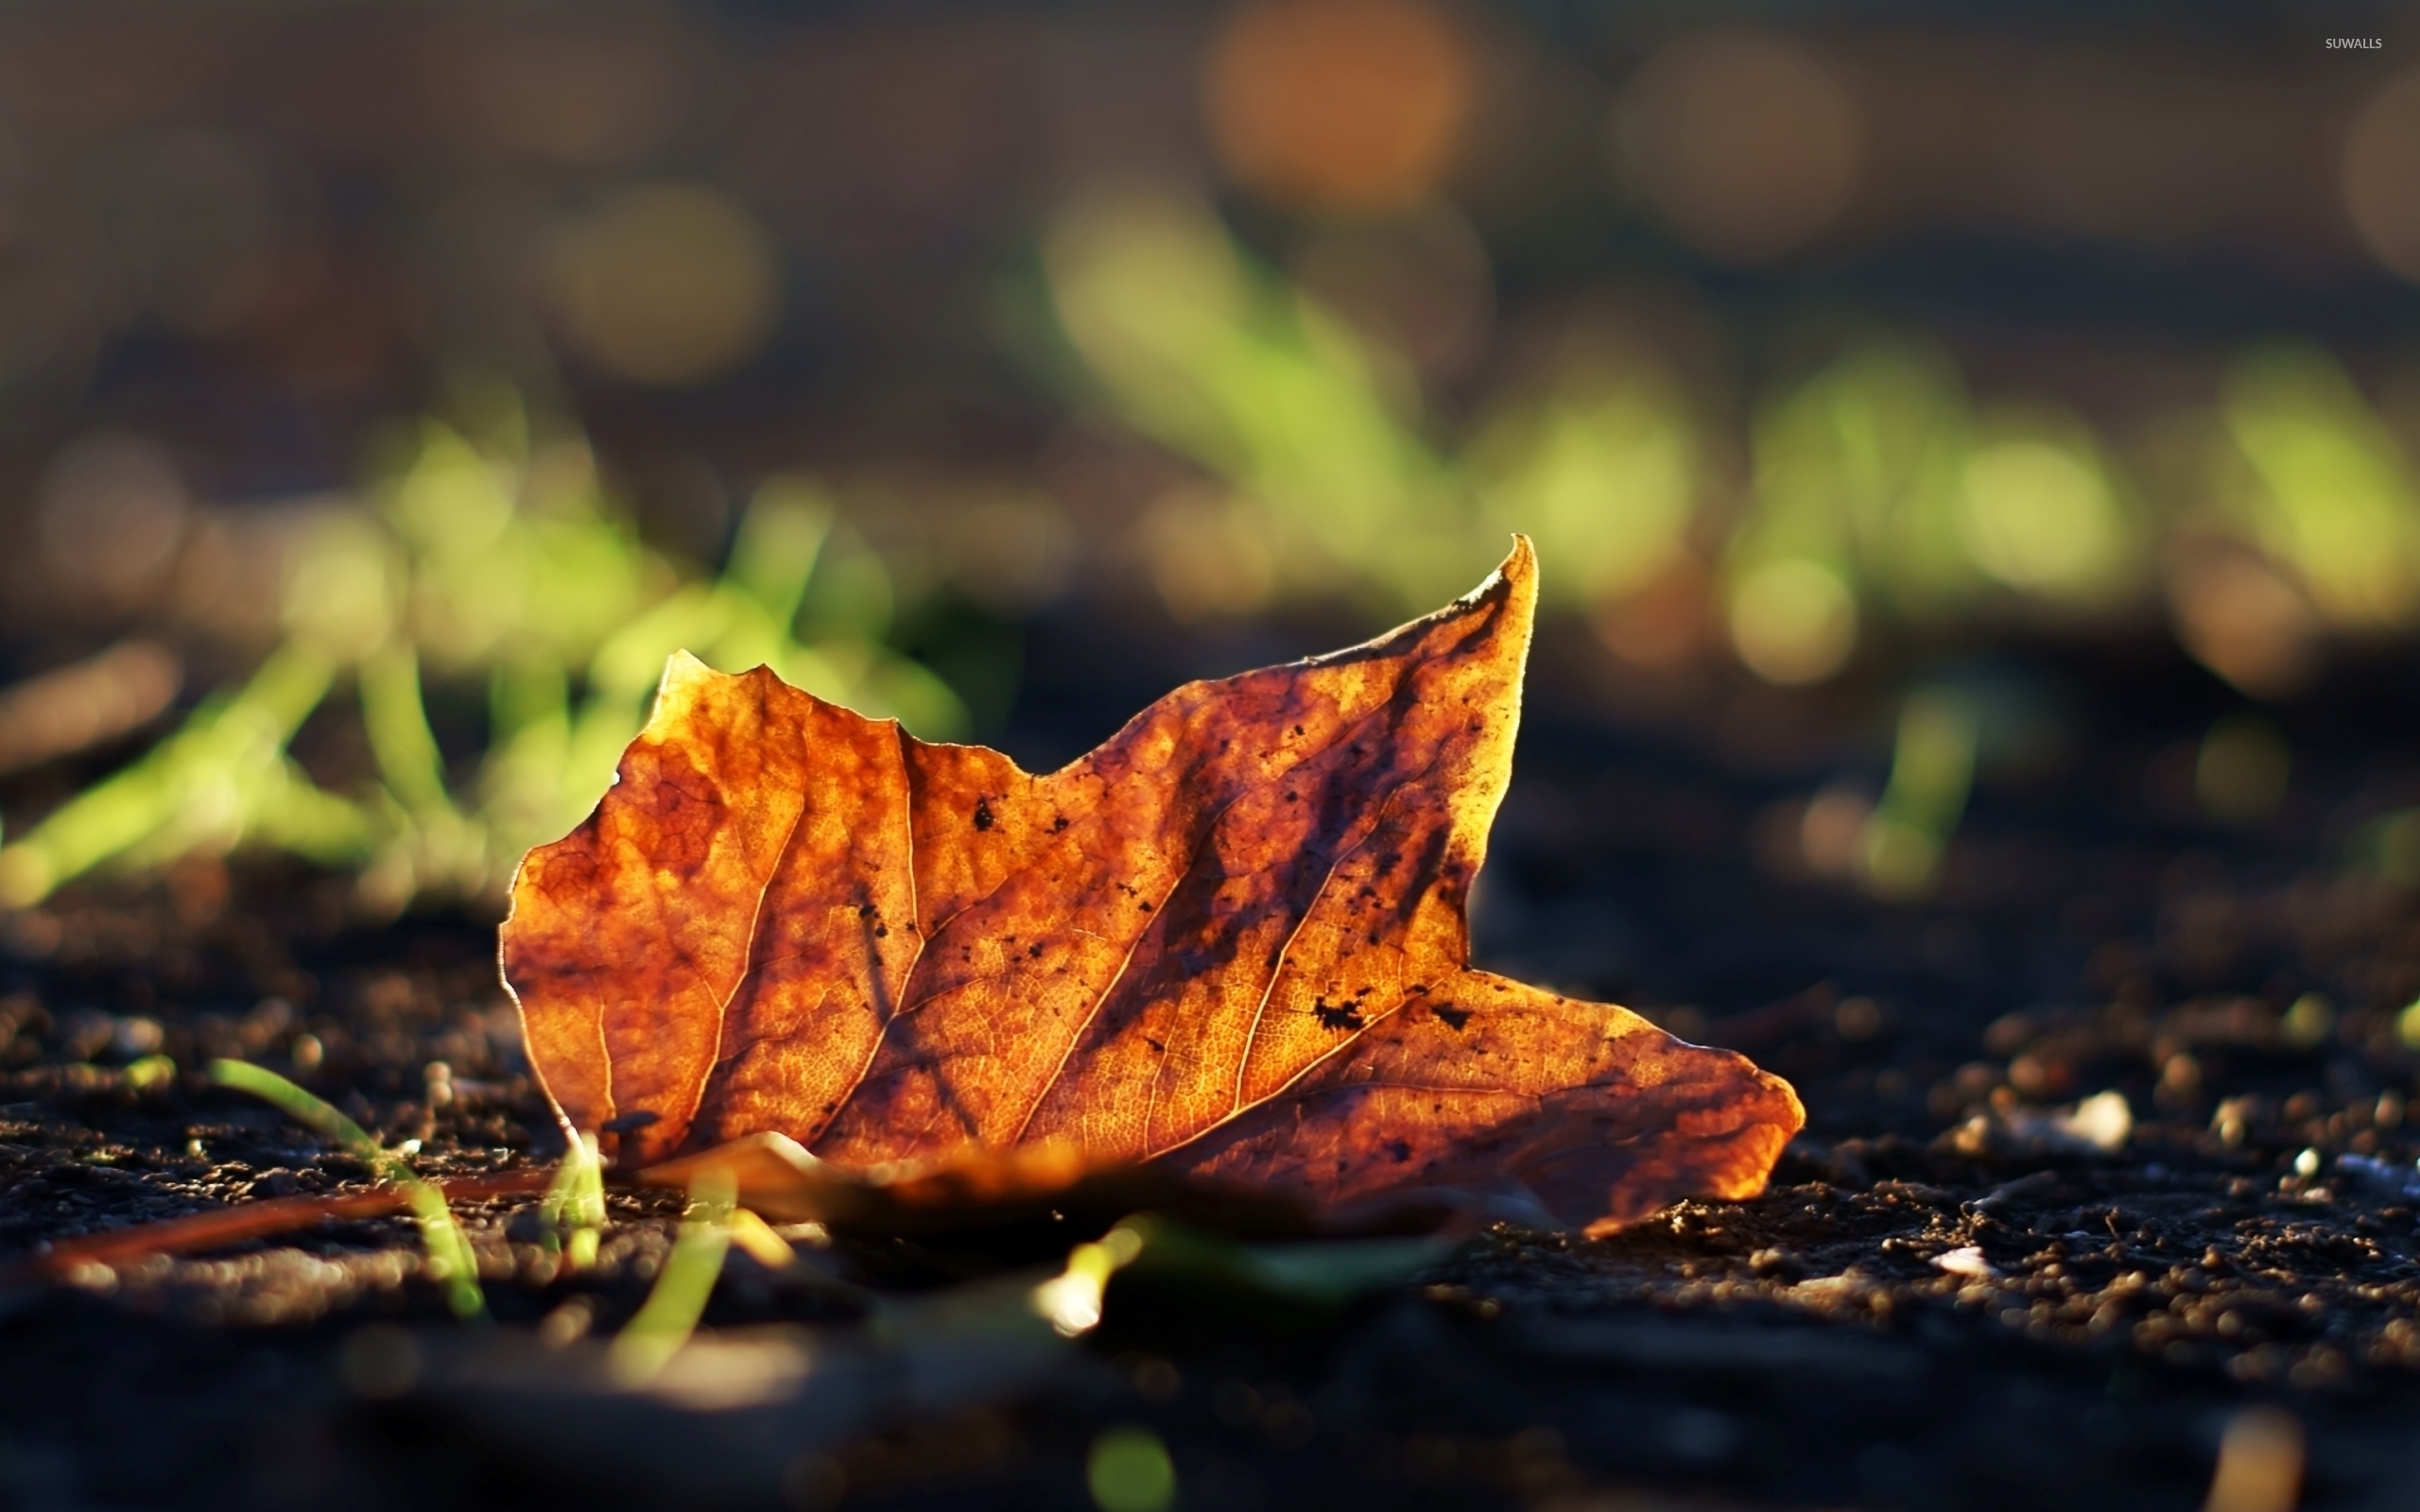 Autumn leaf on the ground wallpaper - Photography wallpapers - #34018